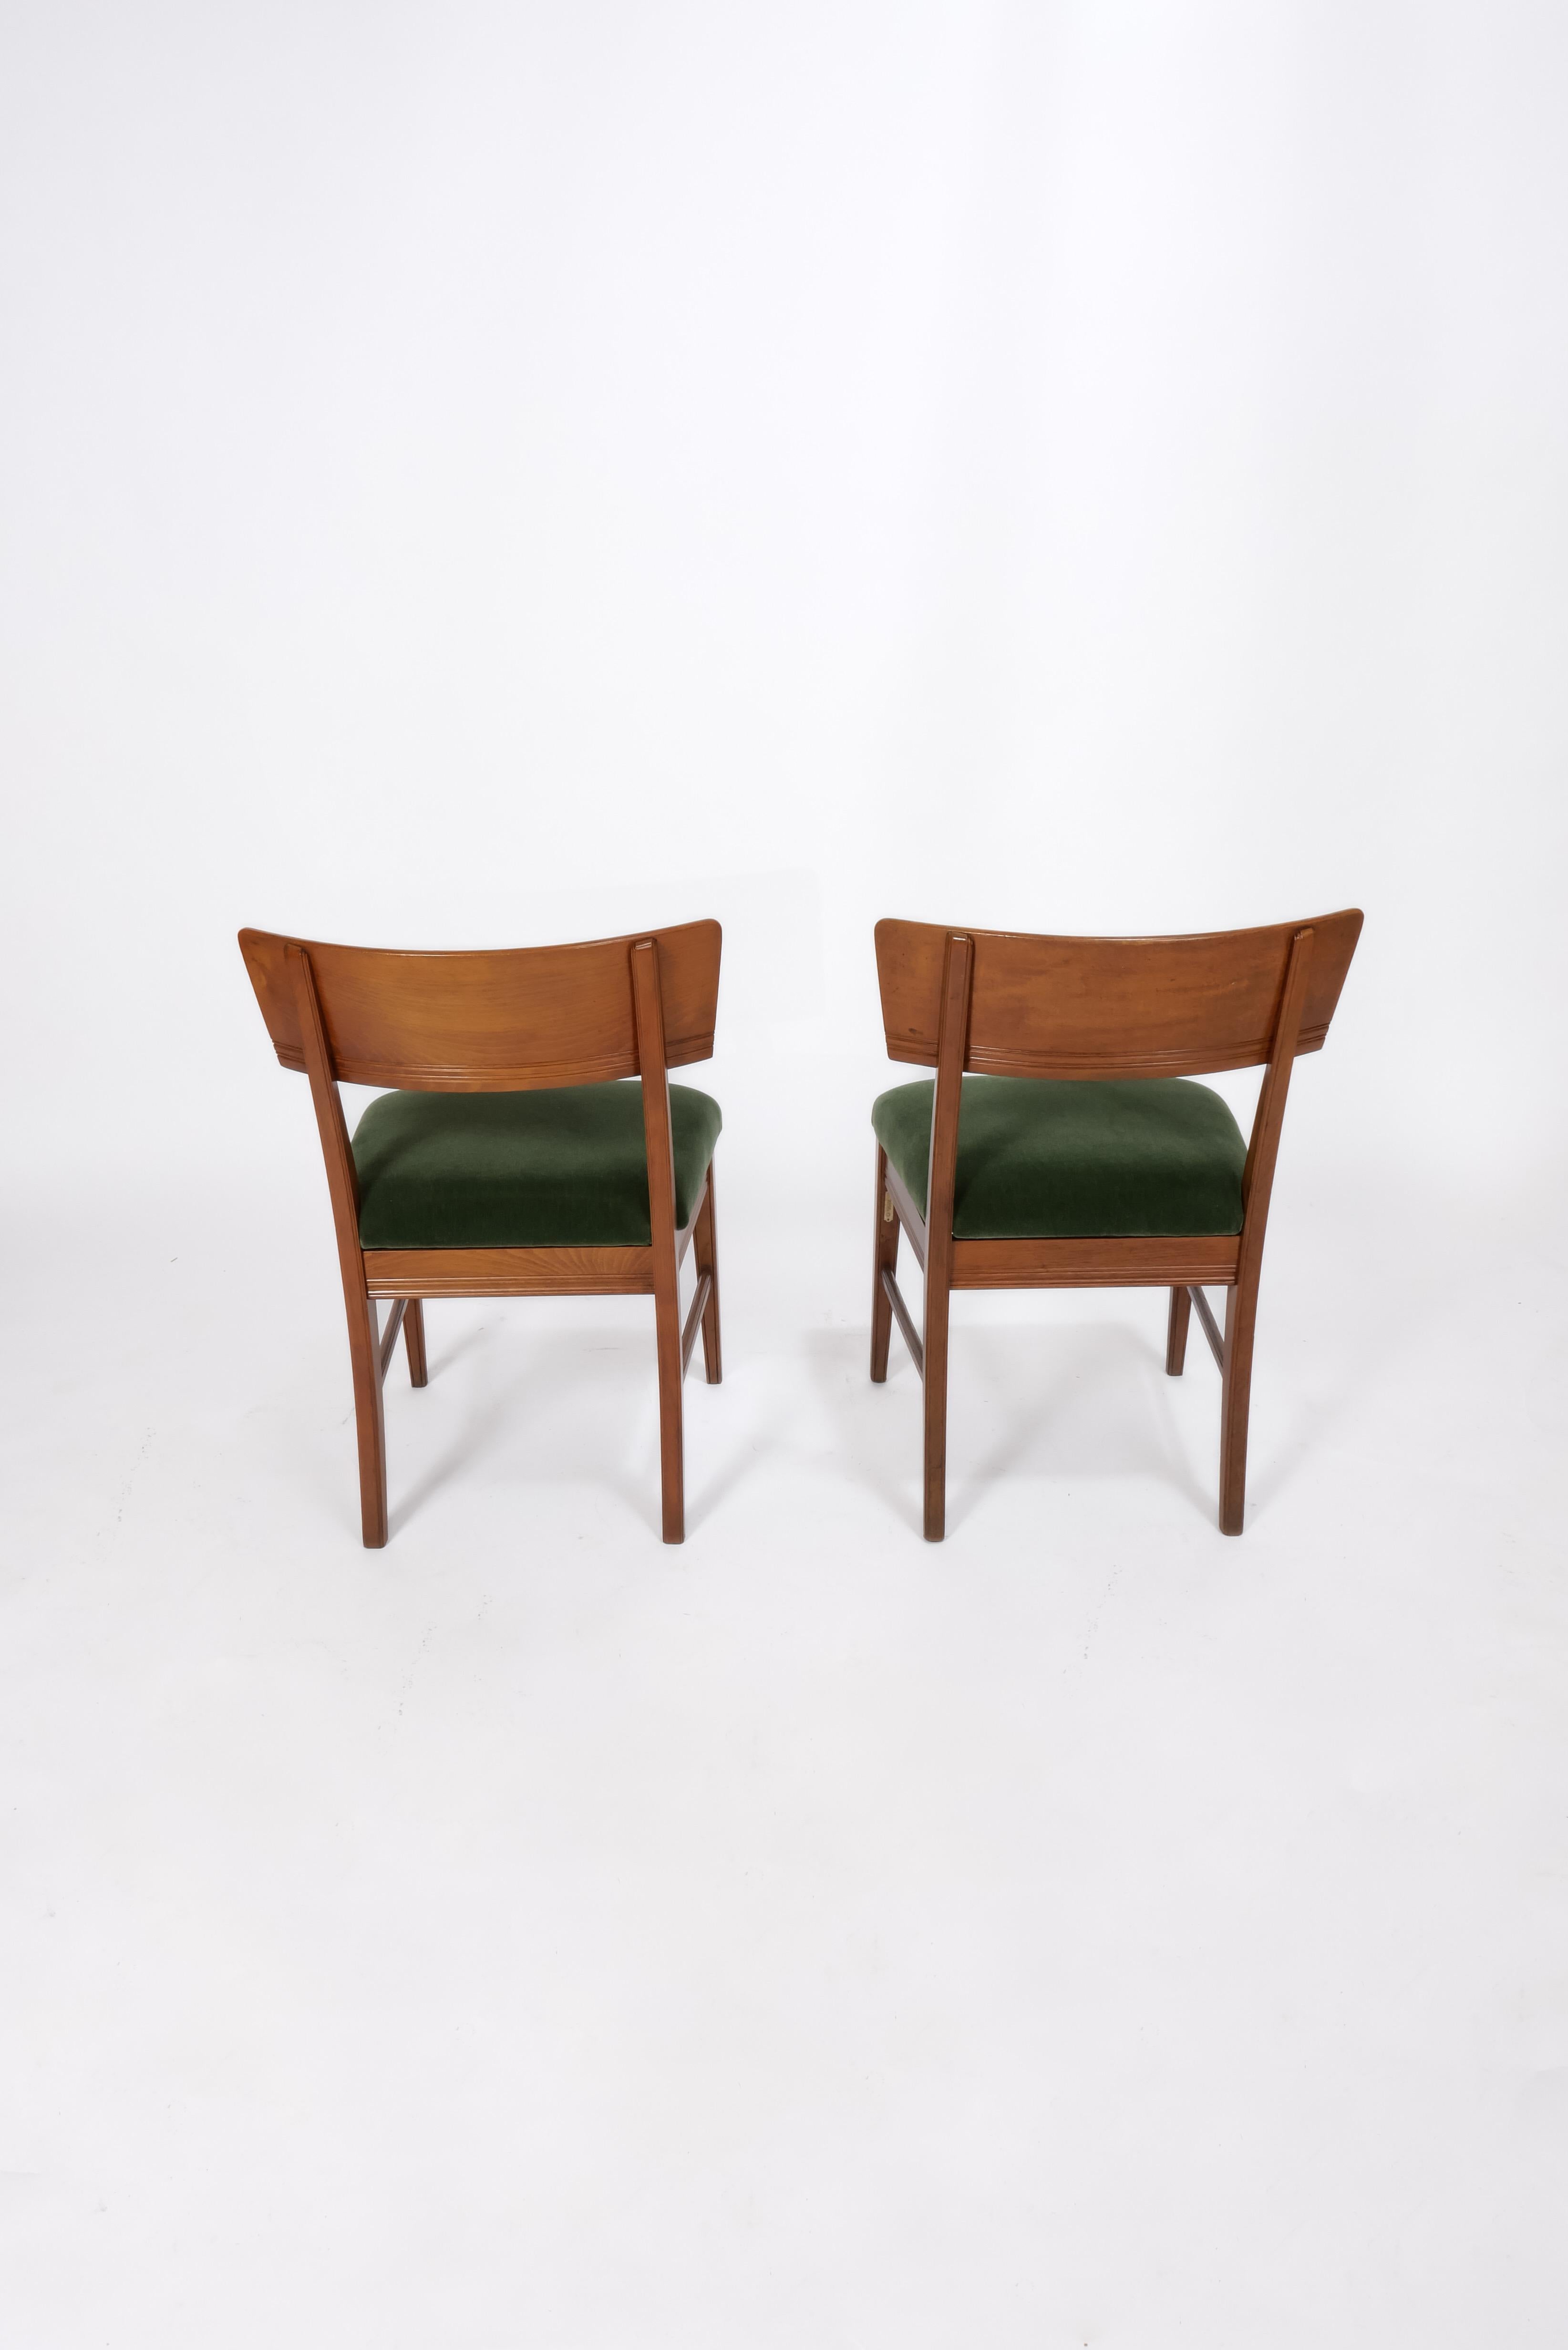 Danish Oak side chairs by Martin Nyrop, a pair